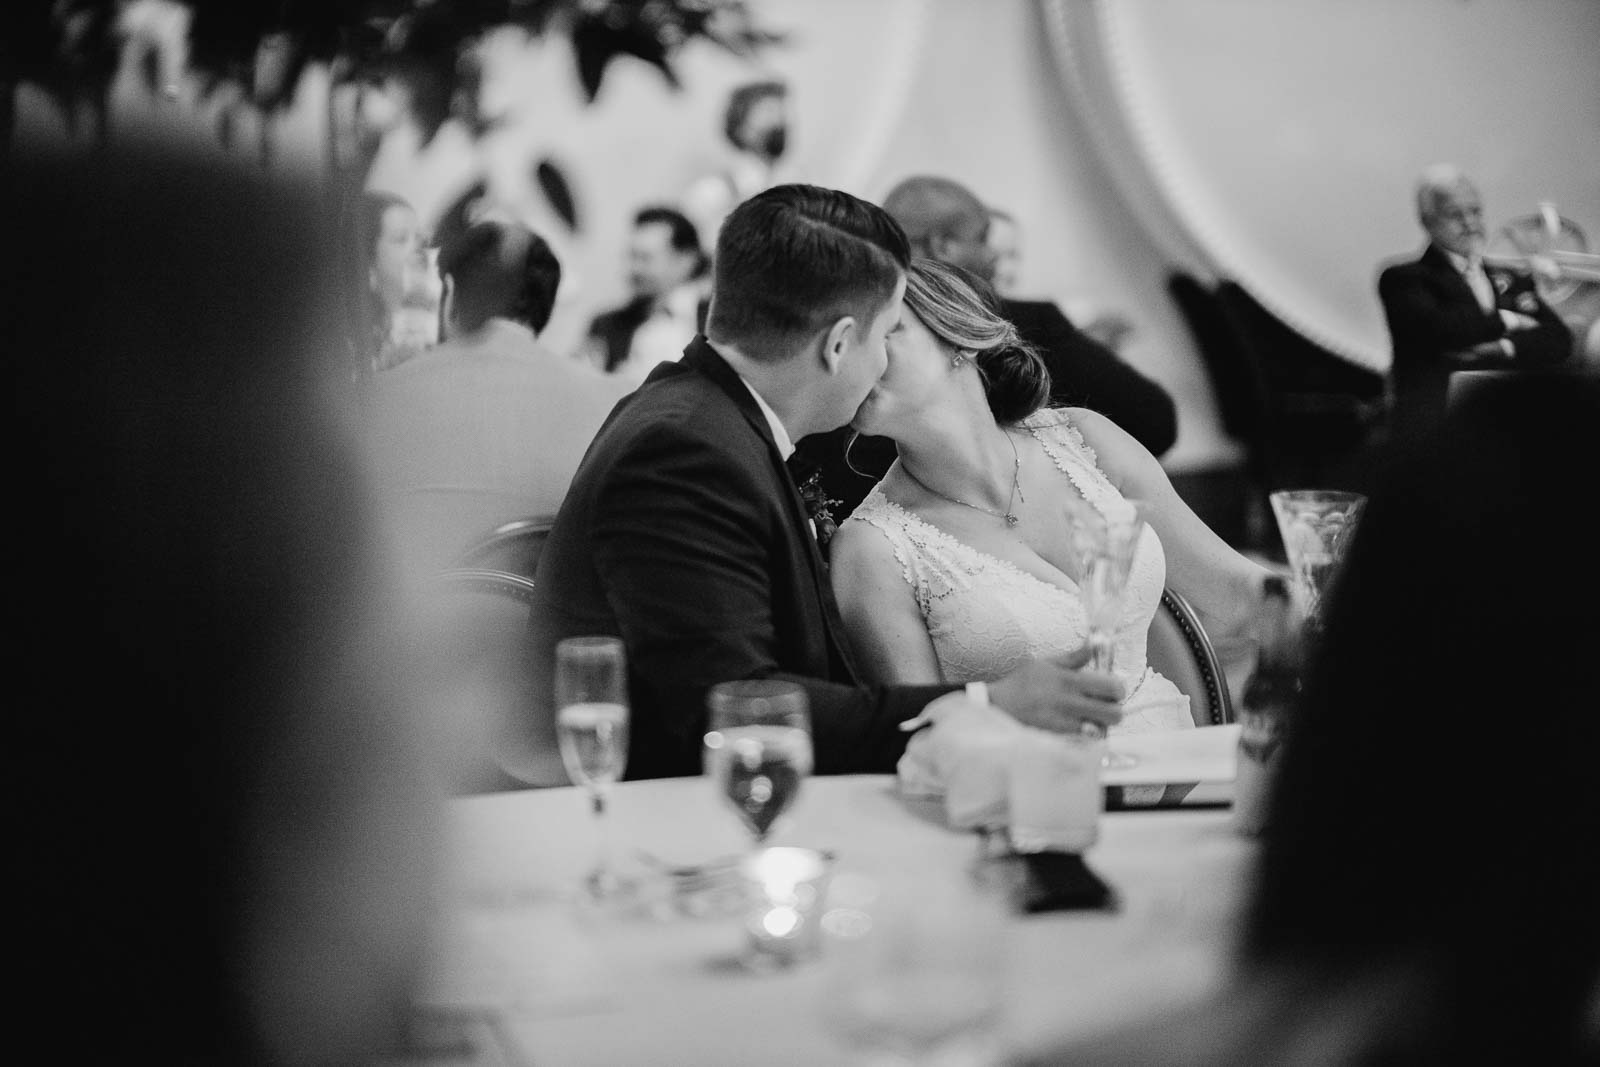 The couple steal a kiss during the first toast